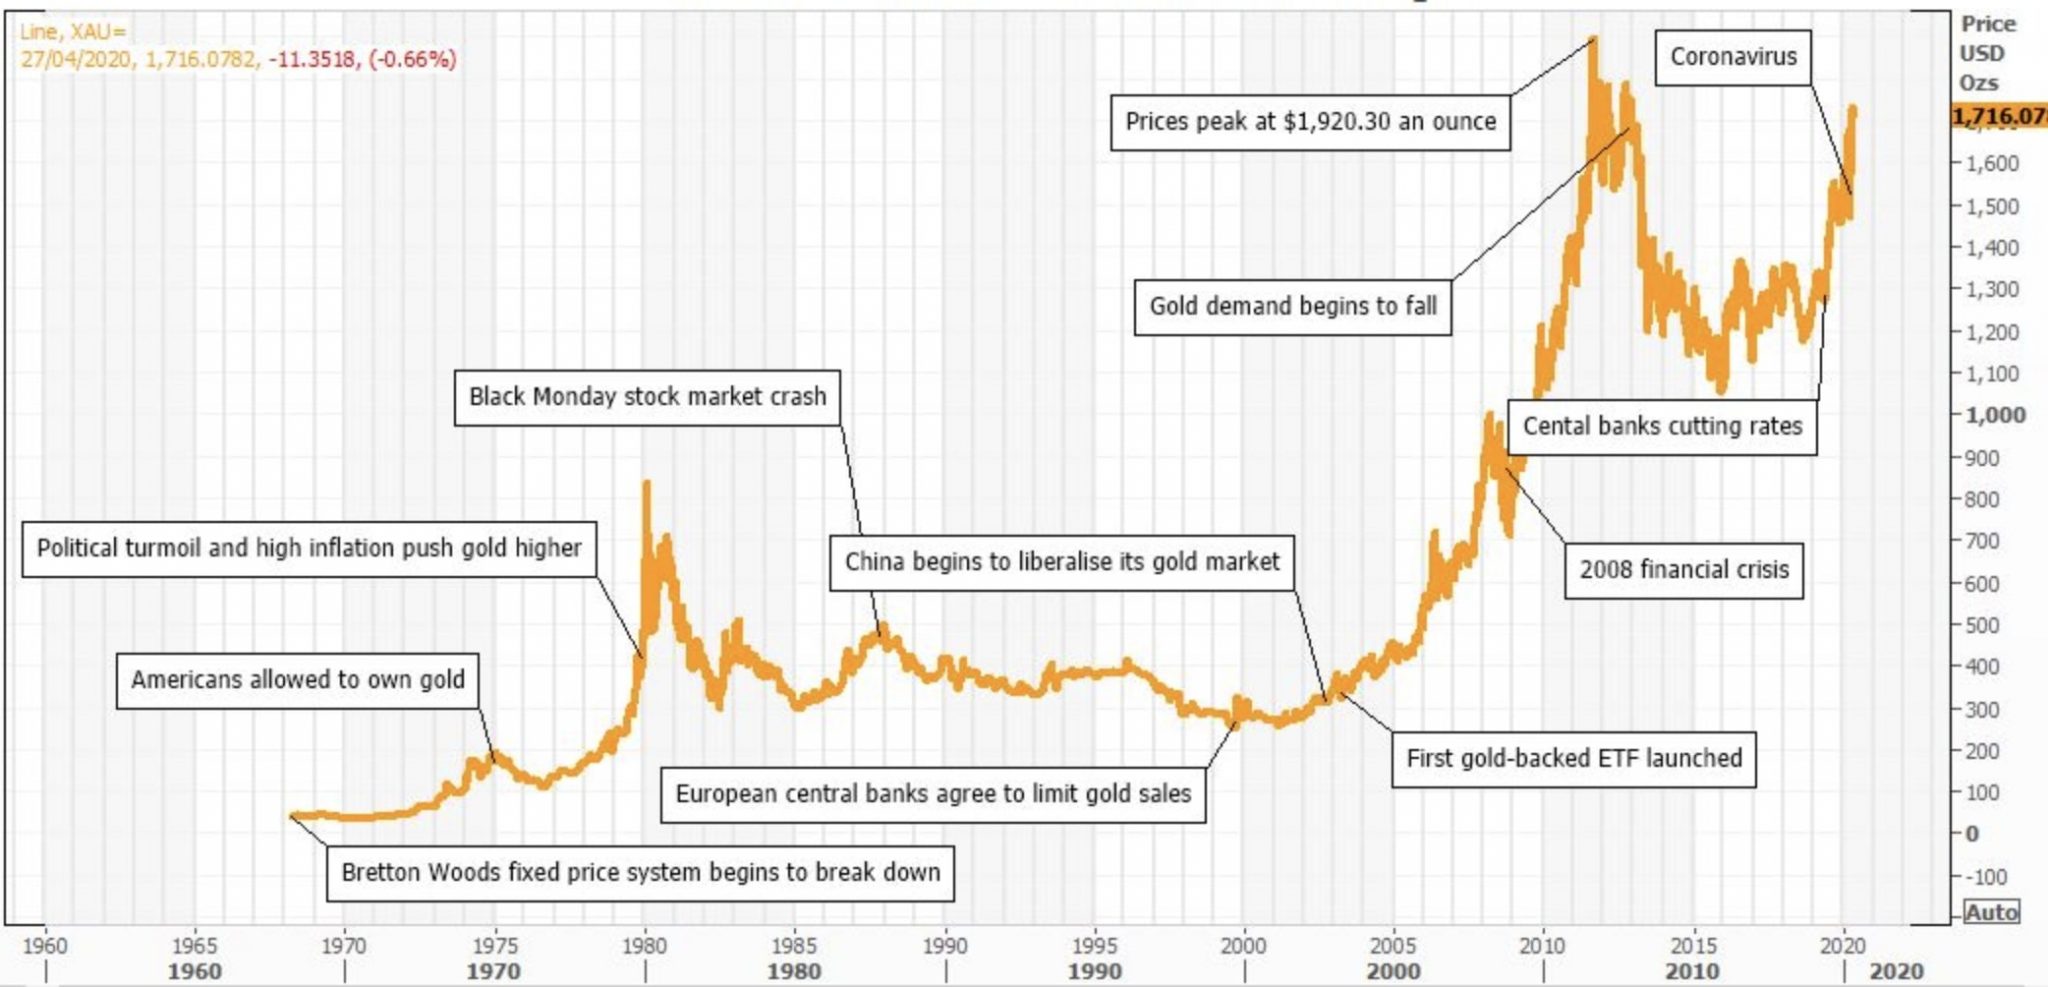 chart of gold rallies and slumps over a 60-year period